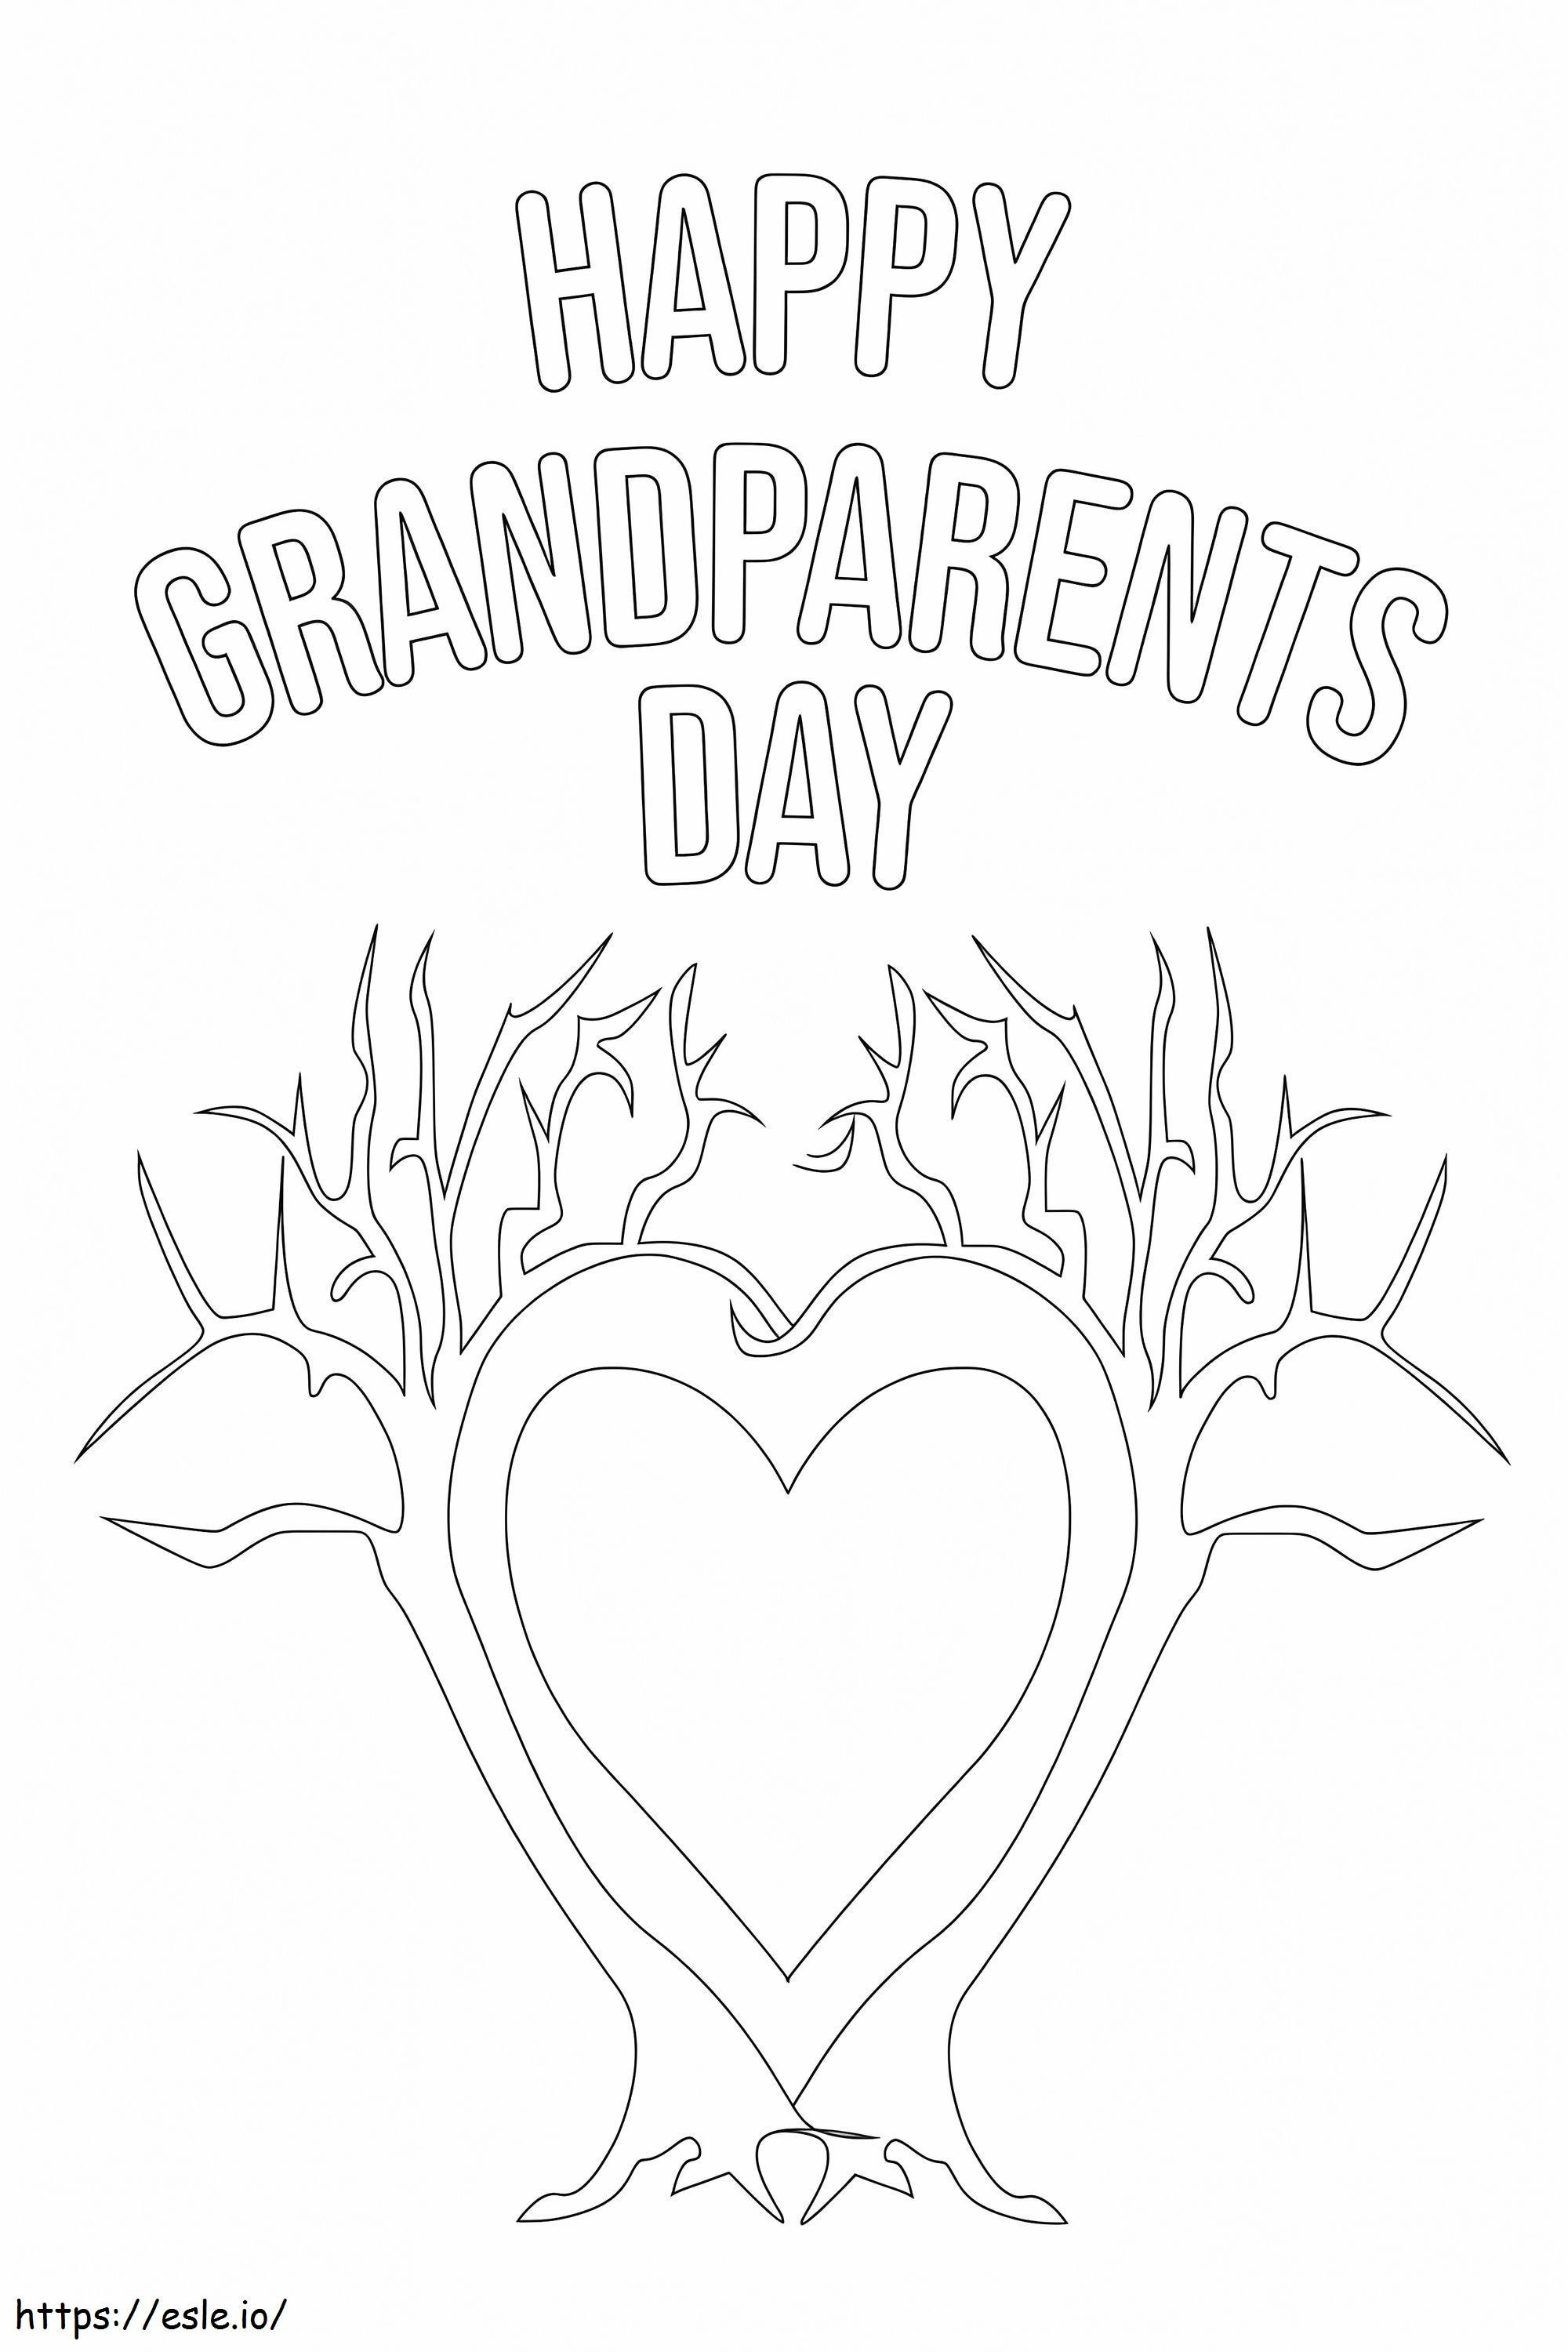 Happy Grandparents Day 7 coloring page